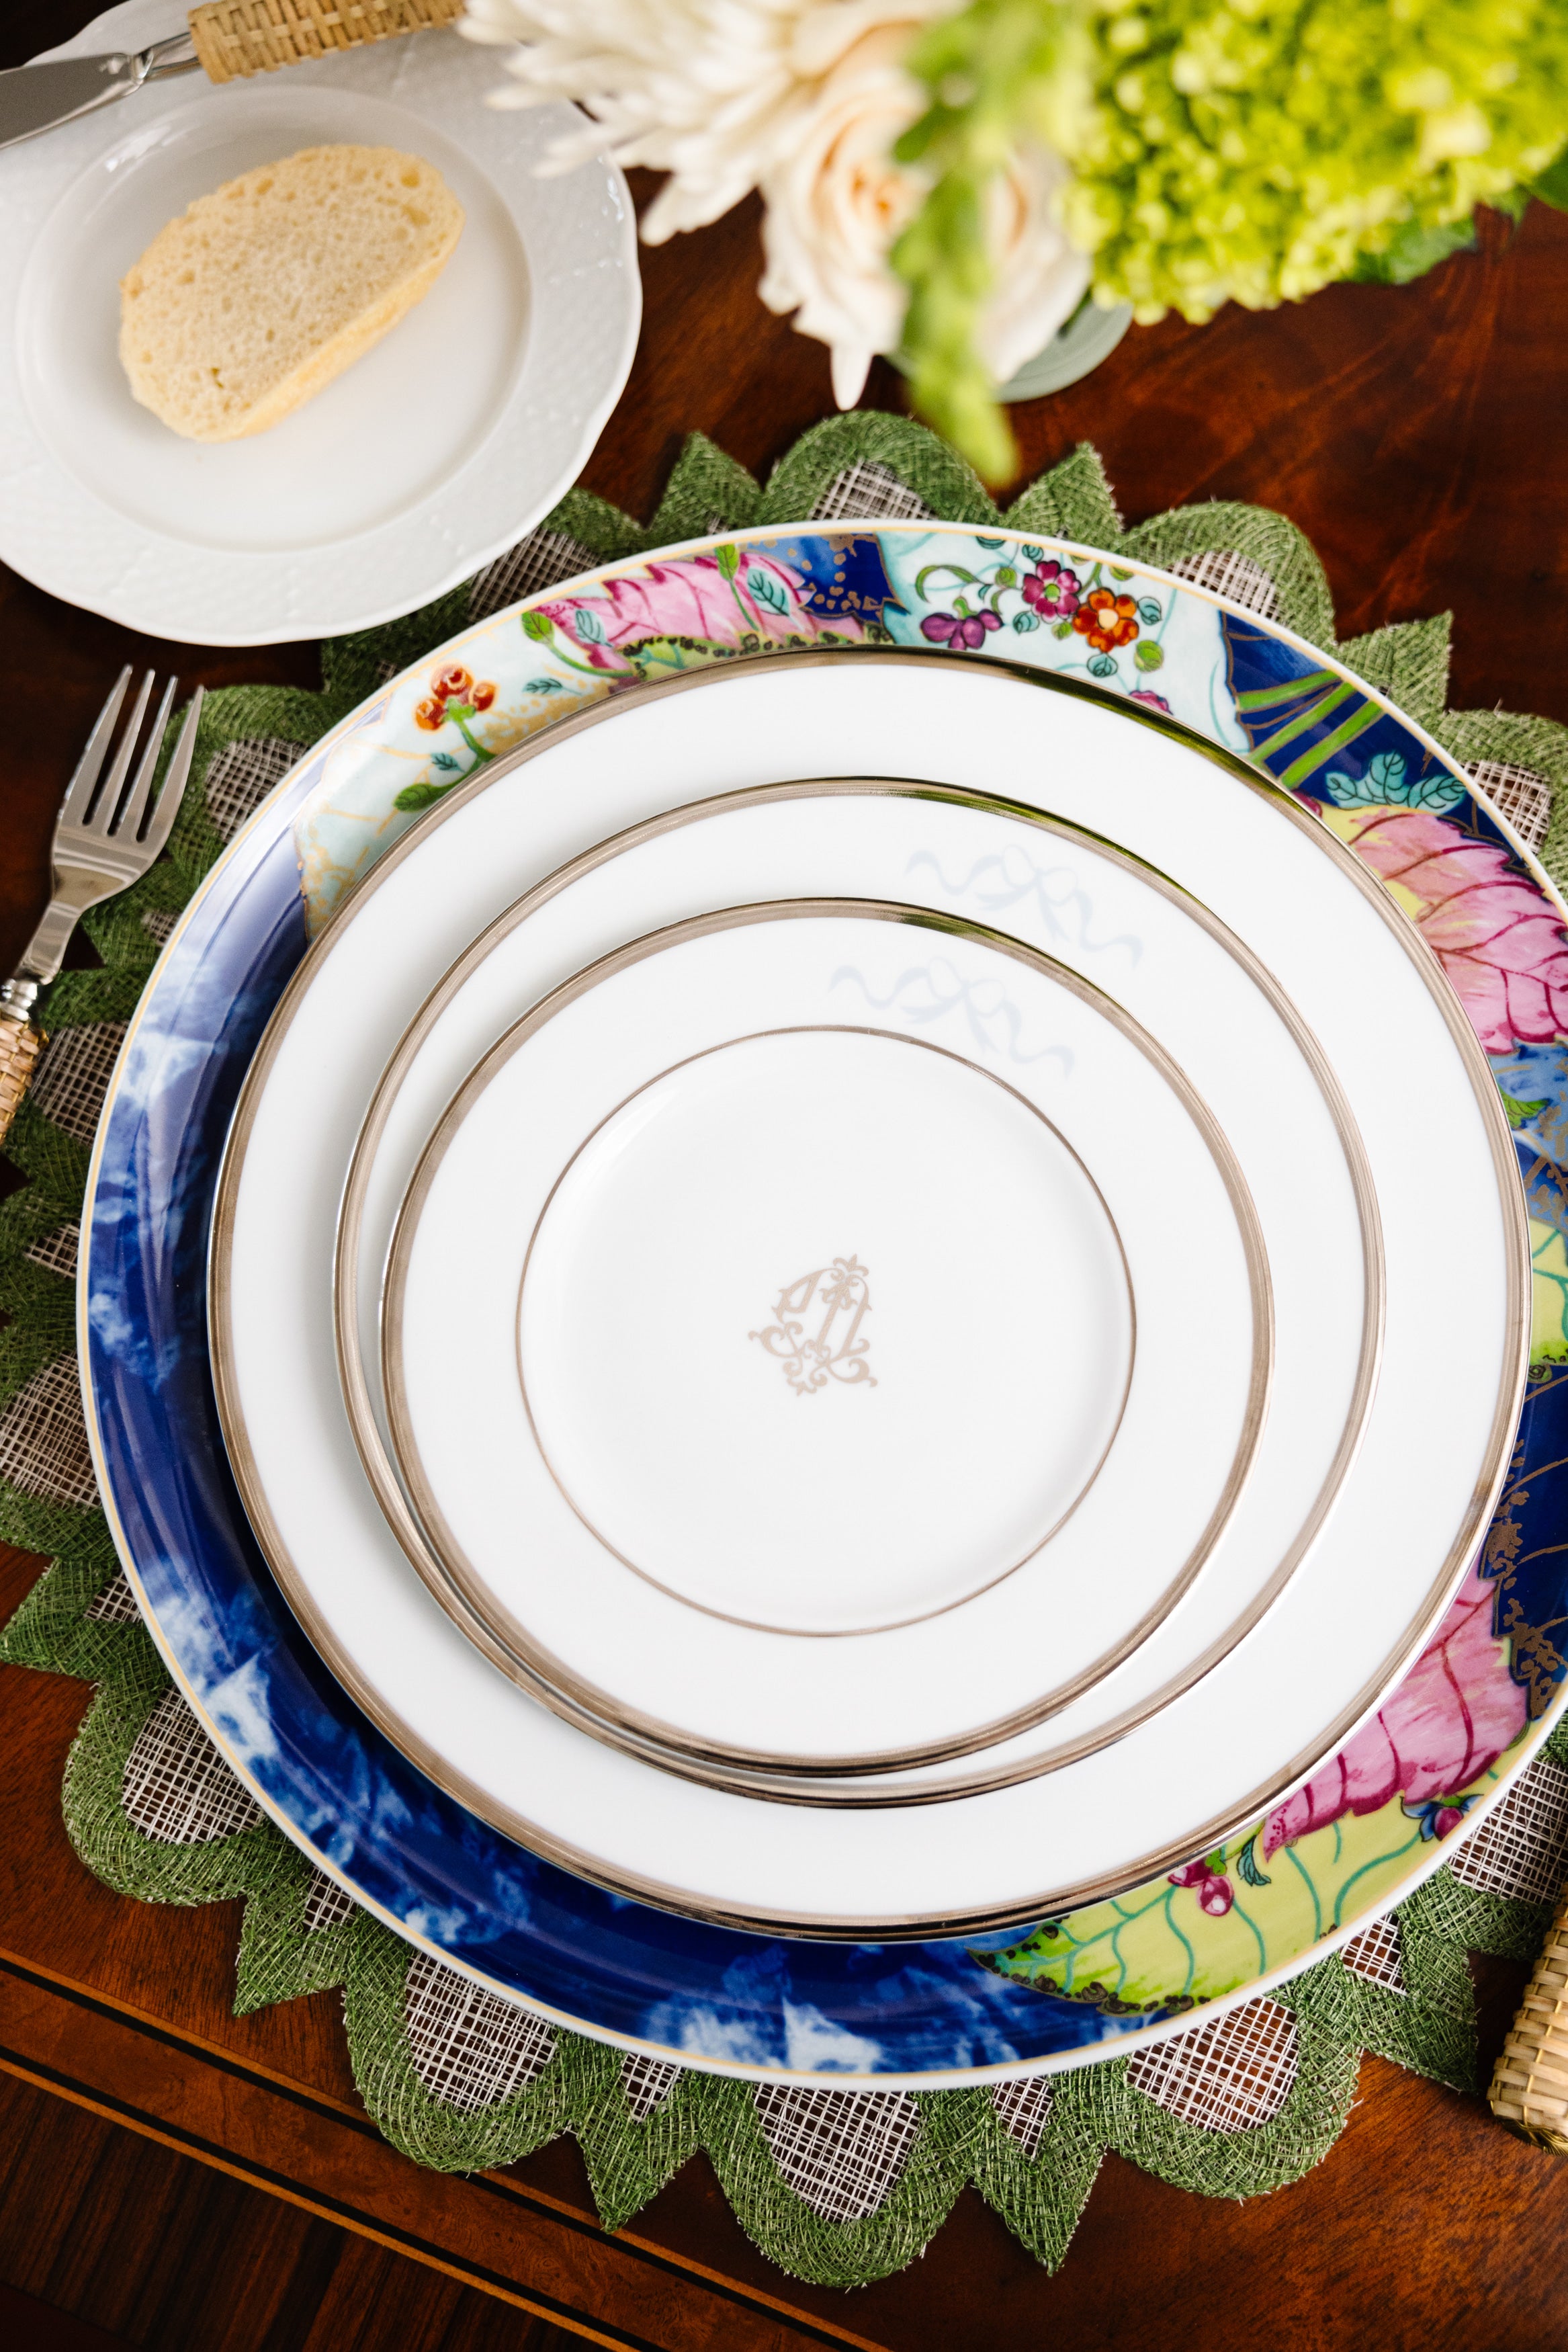 Silver Signature China with Artistry Blue Bows